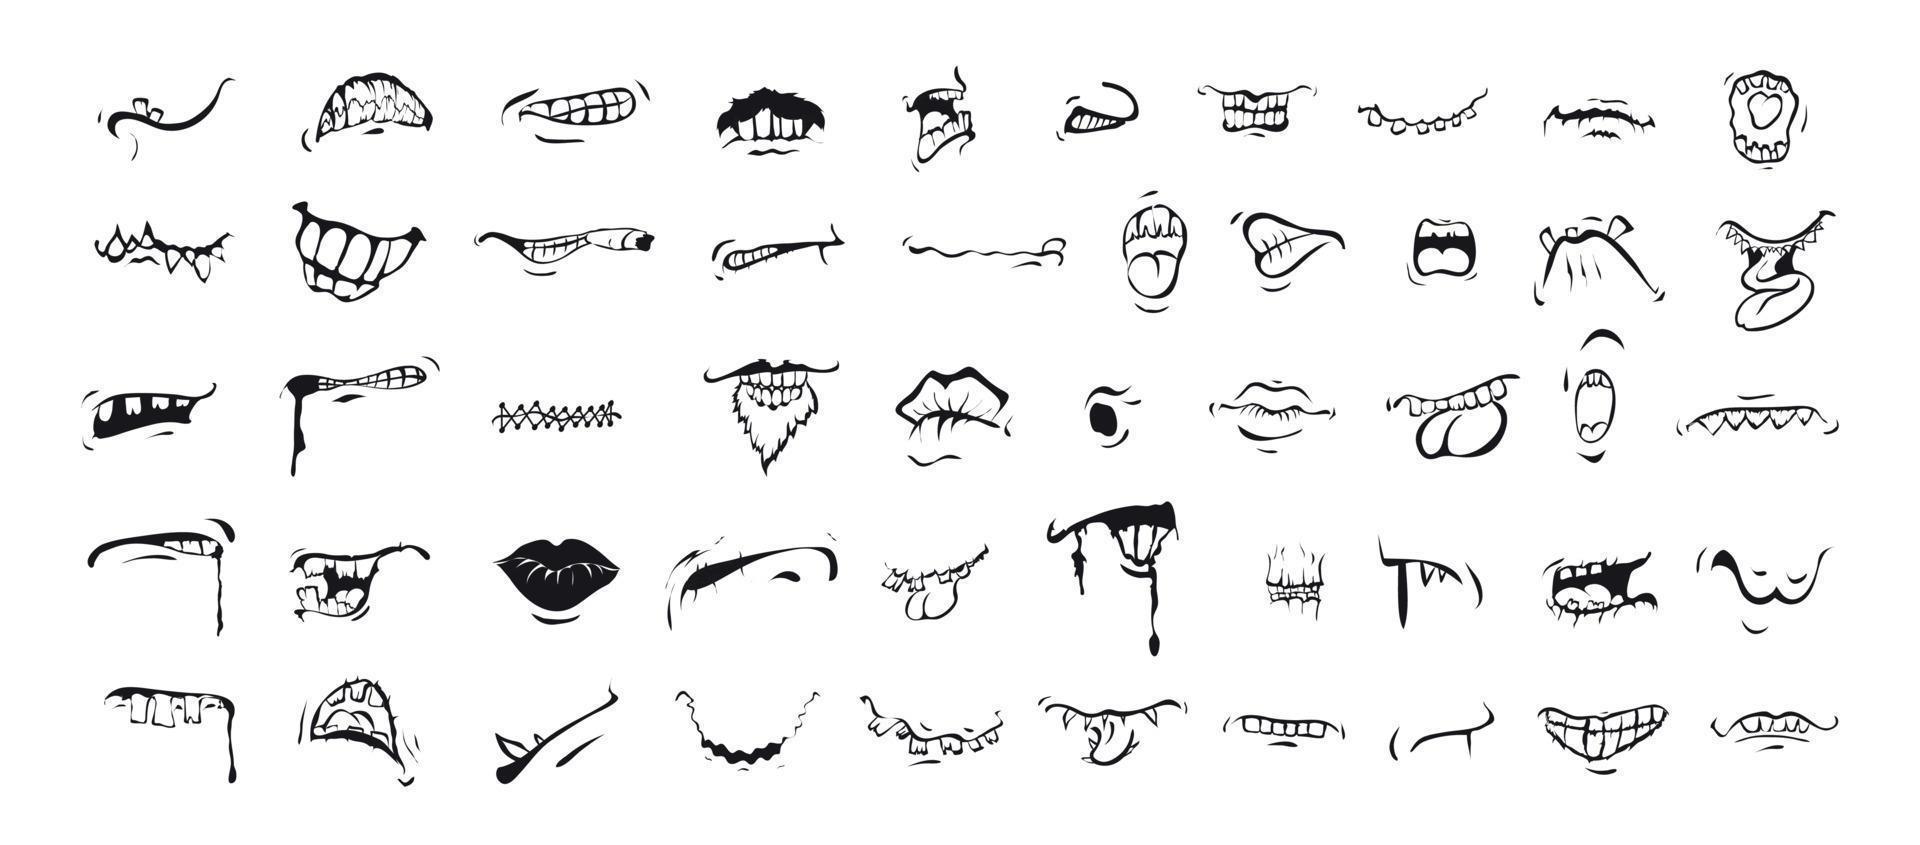 Cartoon Mouths Expressions in Sketch Style vector